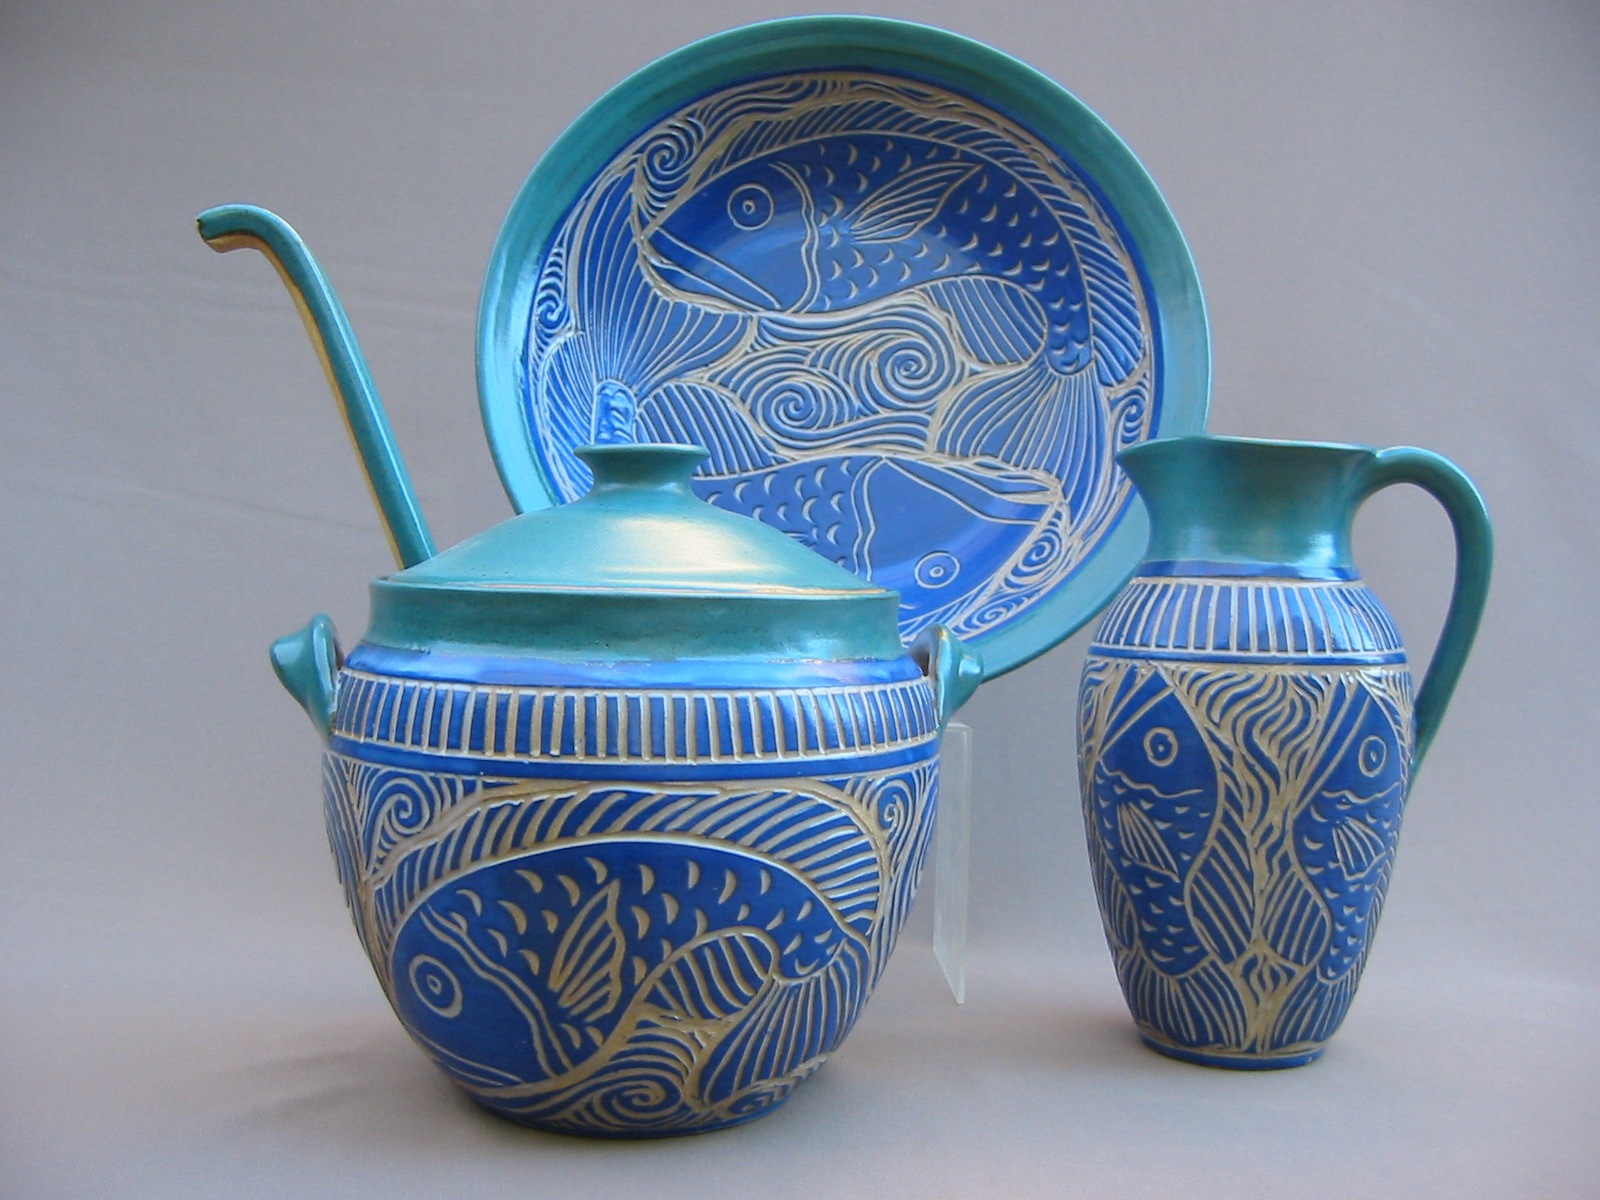 Serving Set in Blue and Turquoise with Carved Sgrafitto Fish Design